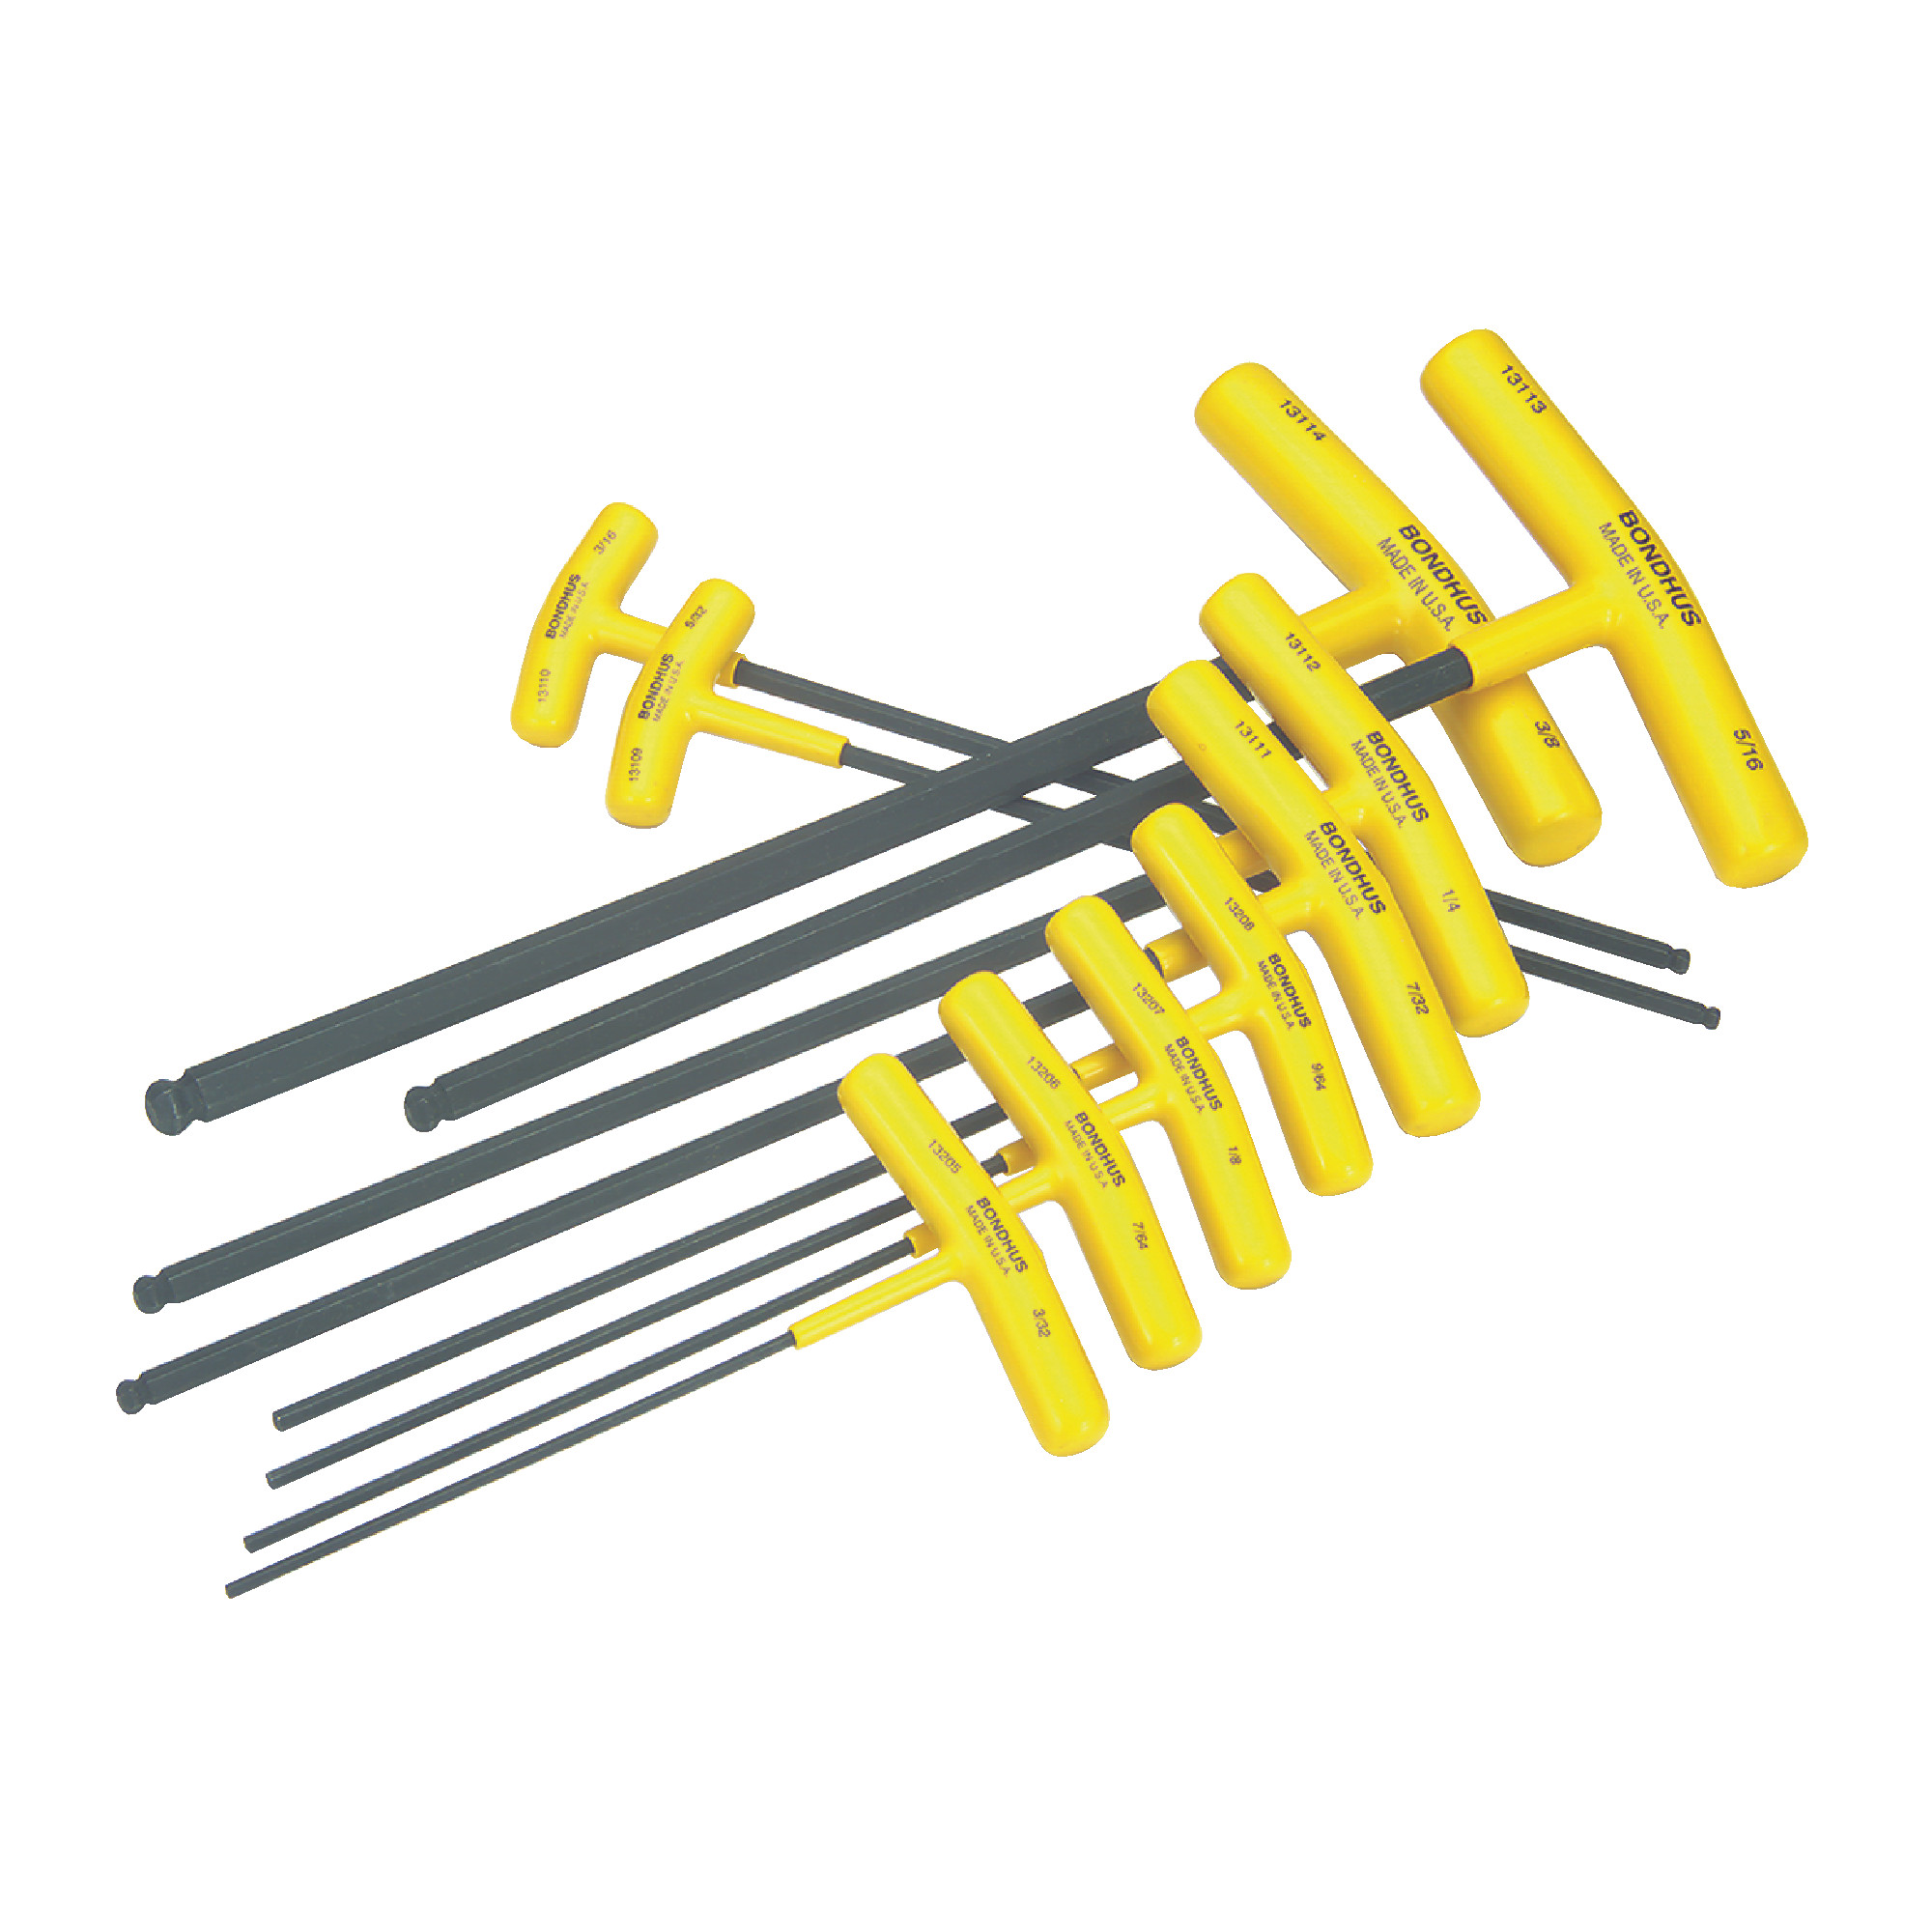 Cushioned Grip T-Handle Hex Tool Set